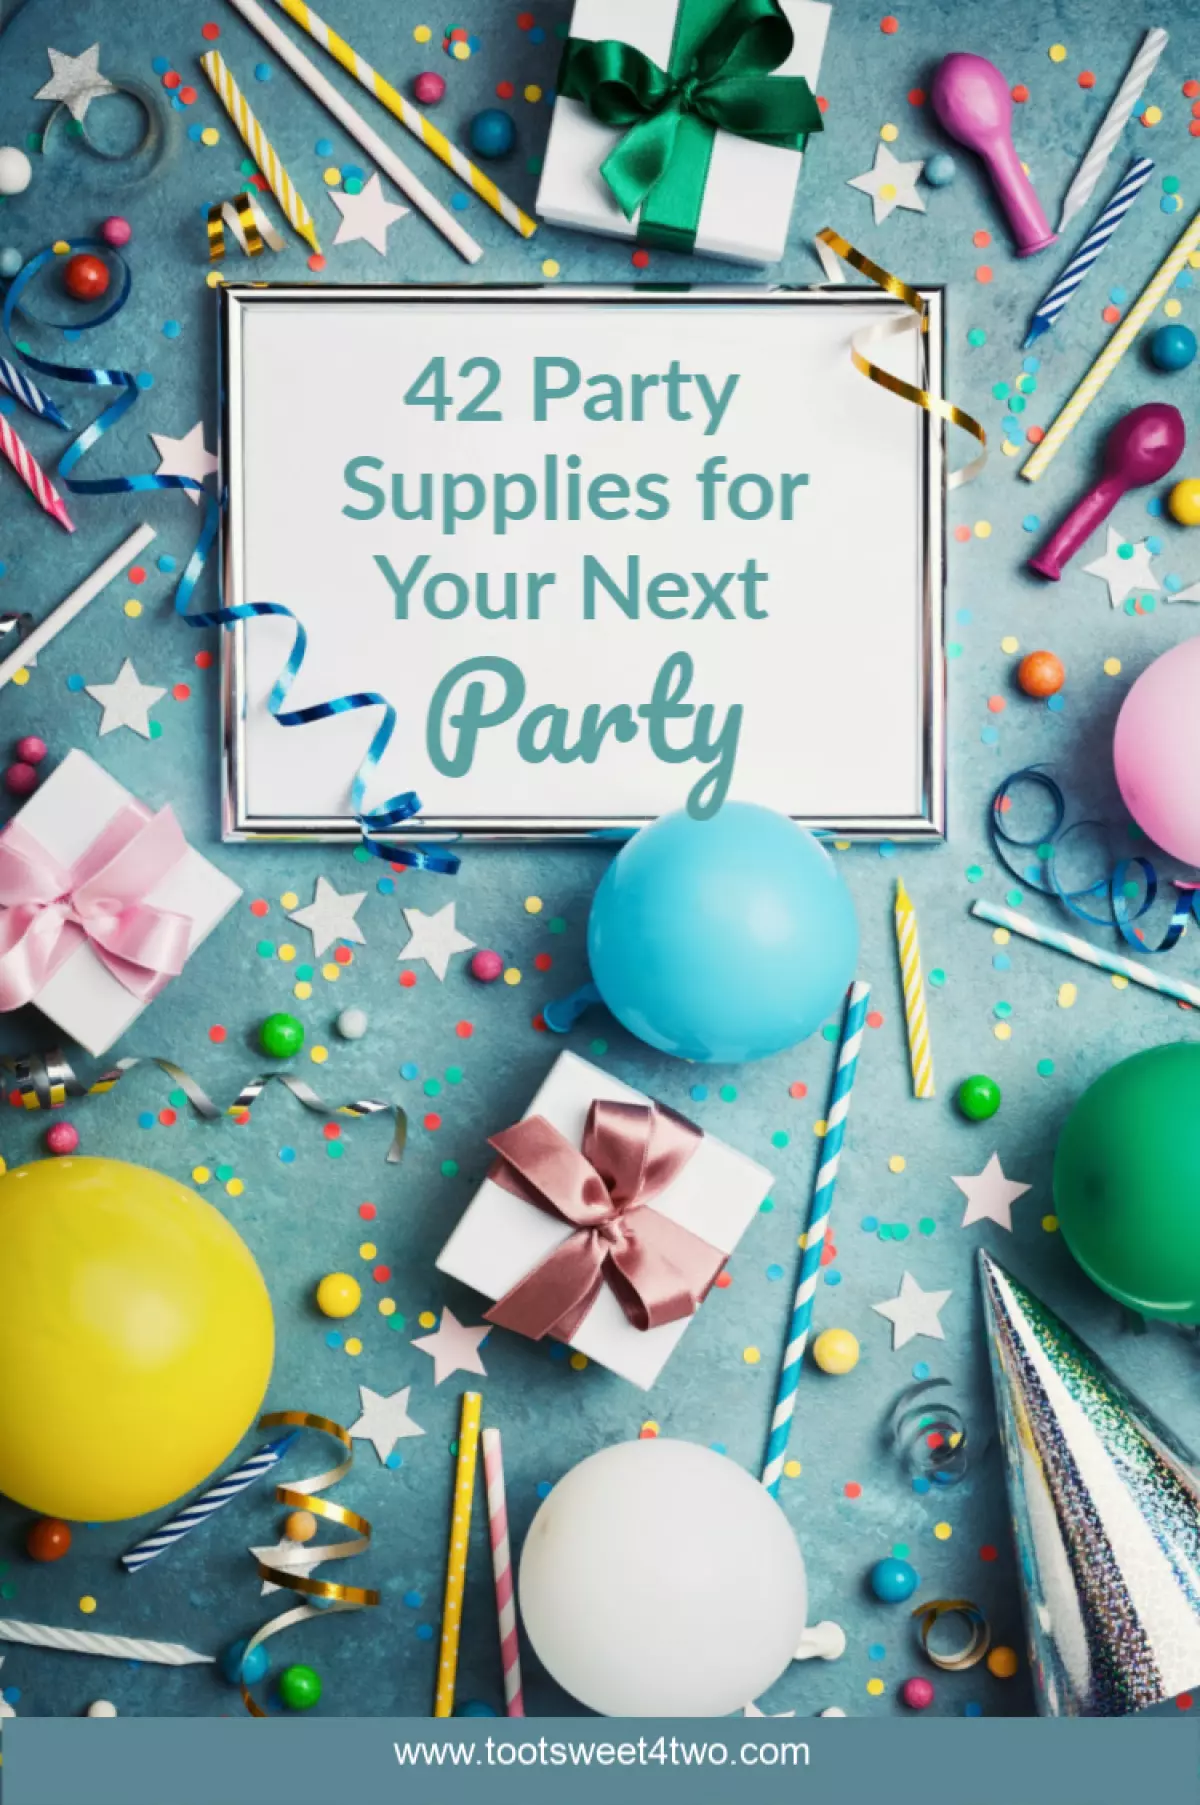 gifts, balloons, and other party decorations with party sign